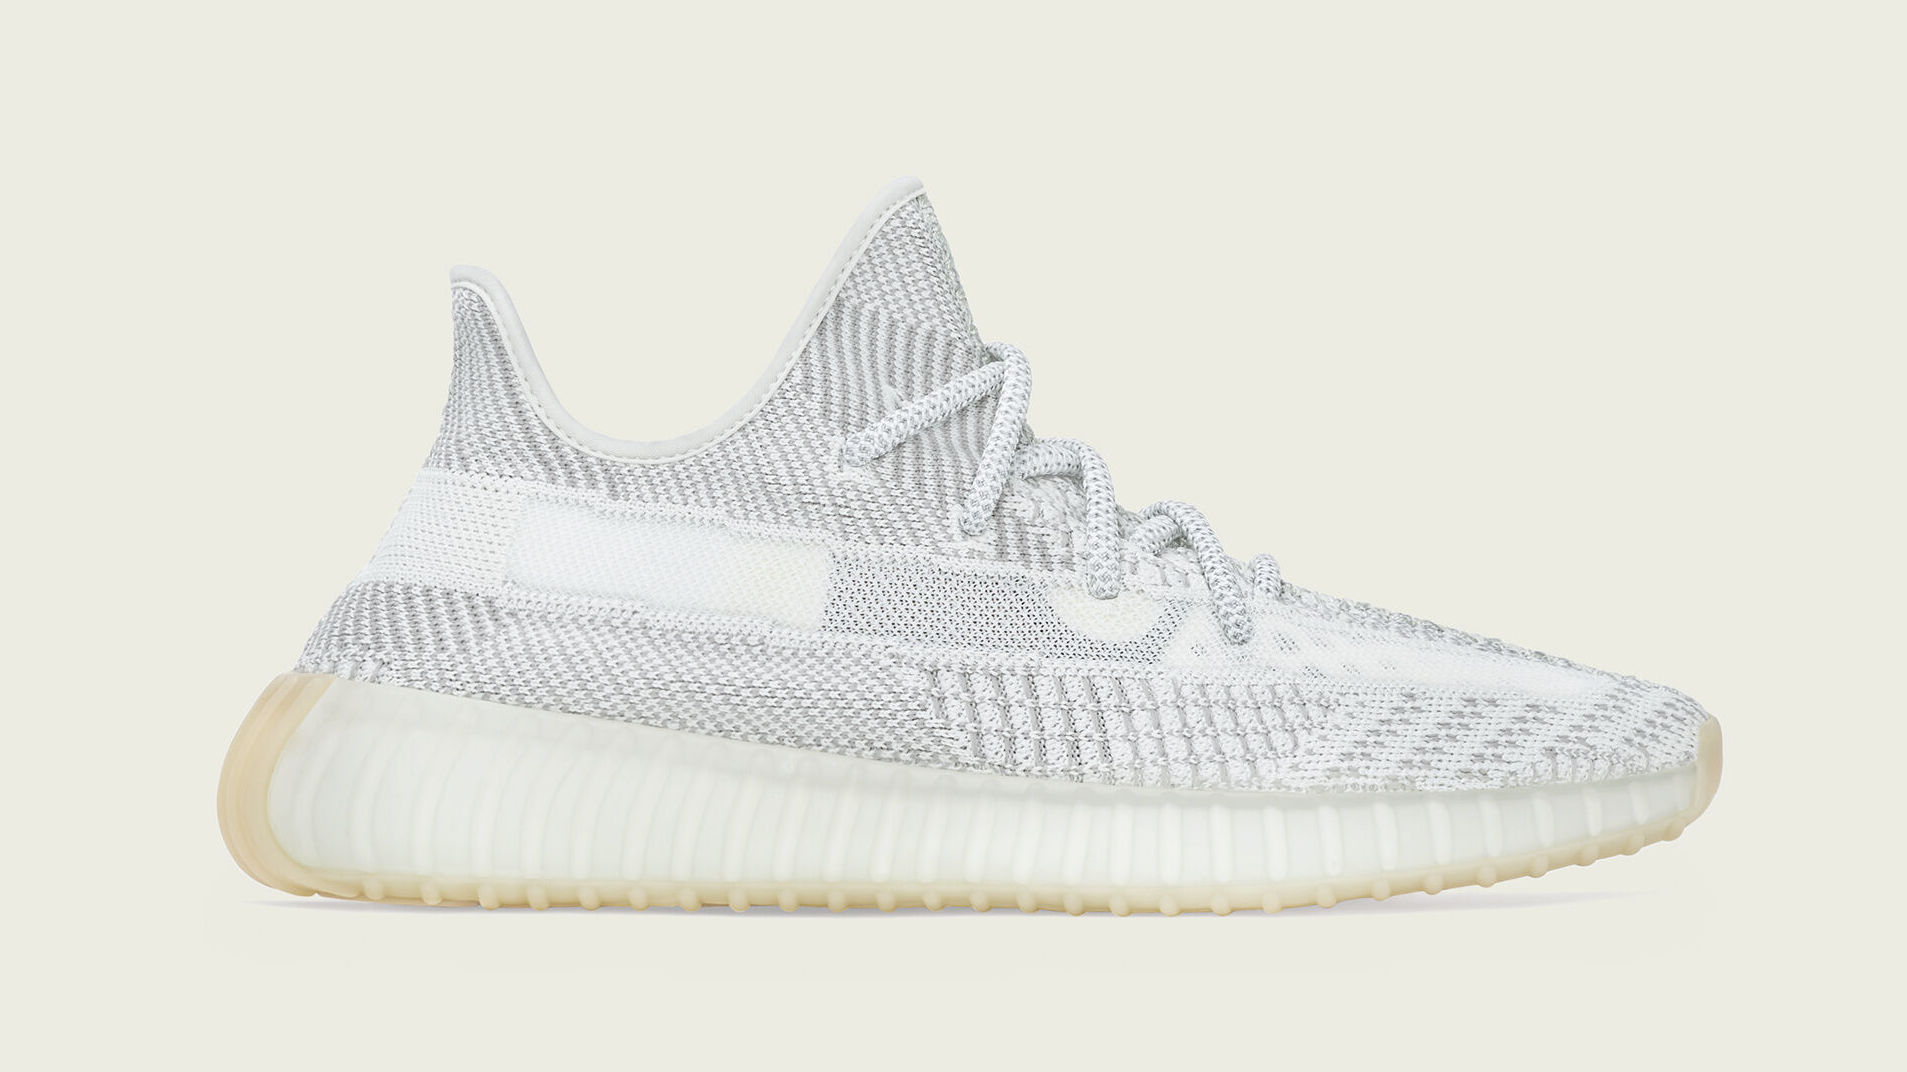 yeezy 350 coming out